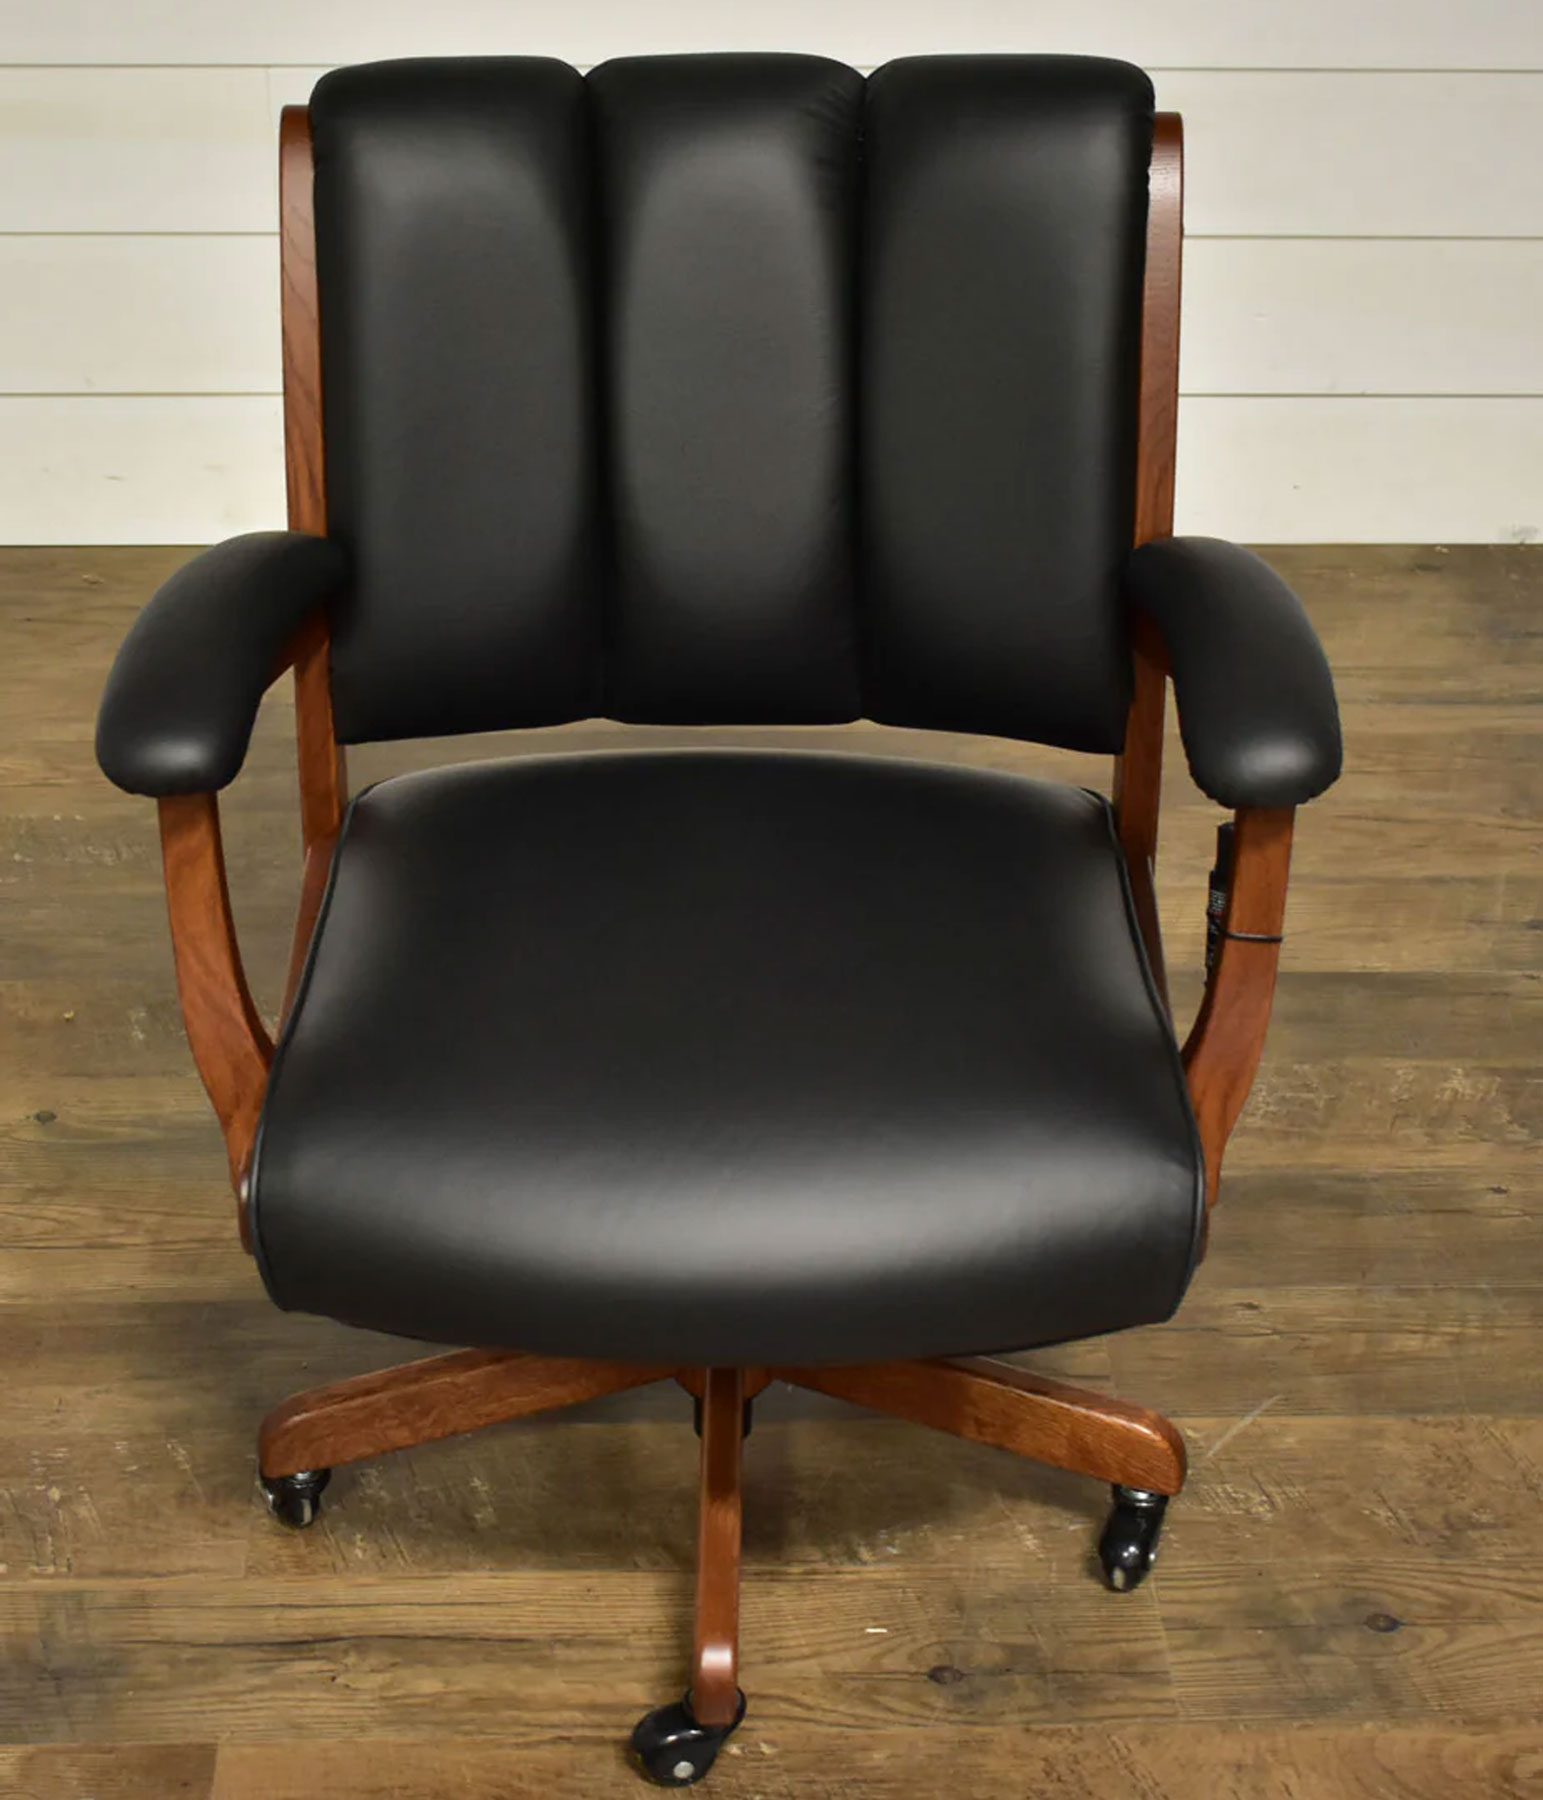 Edelweiss Arm Desk Chair in Black Leather